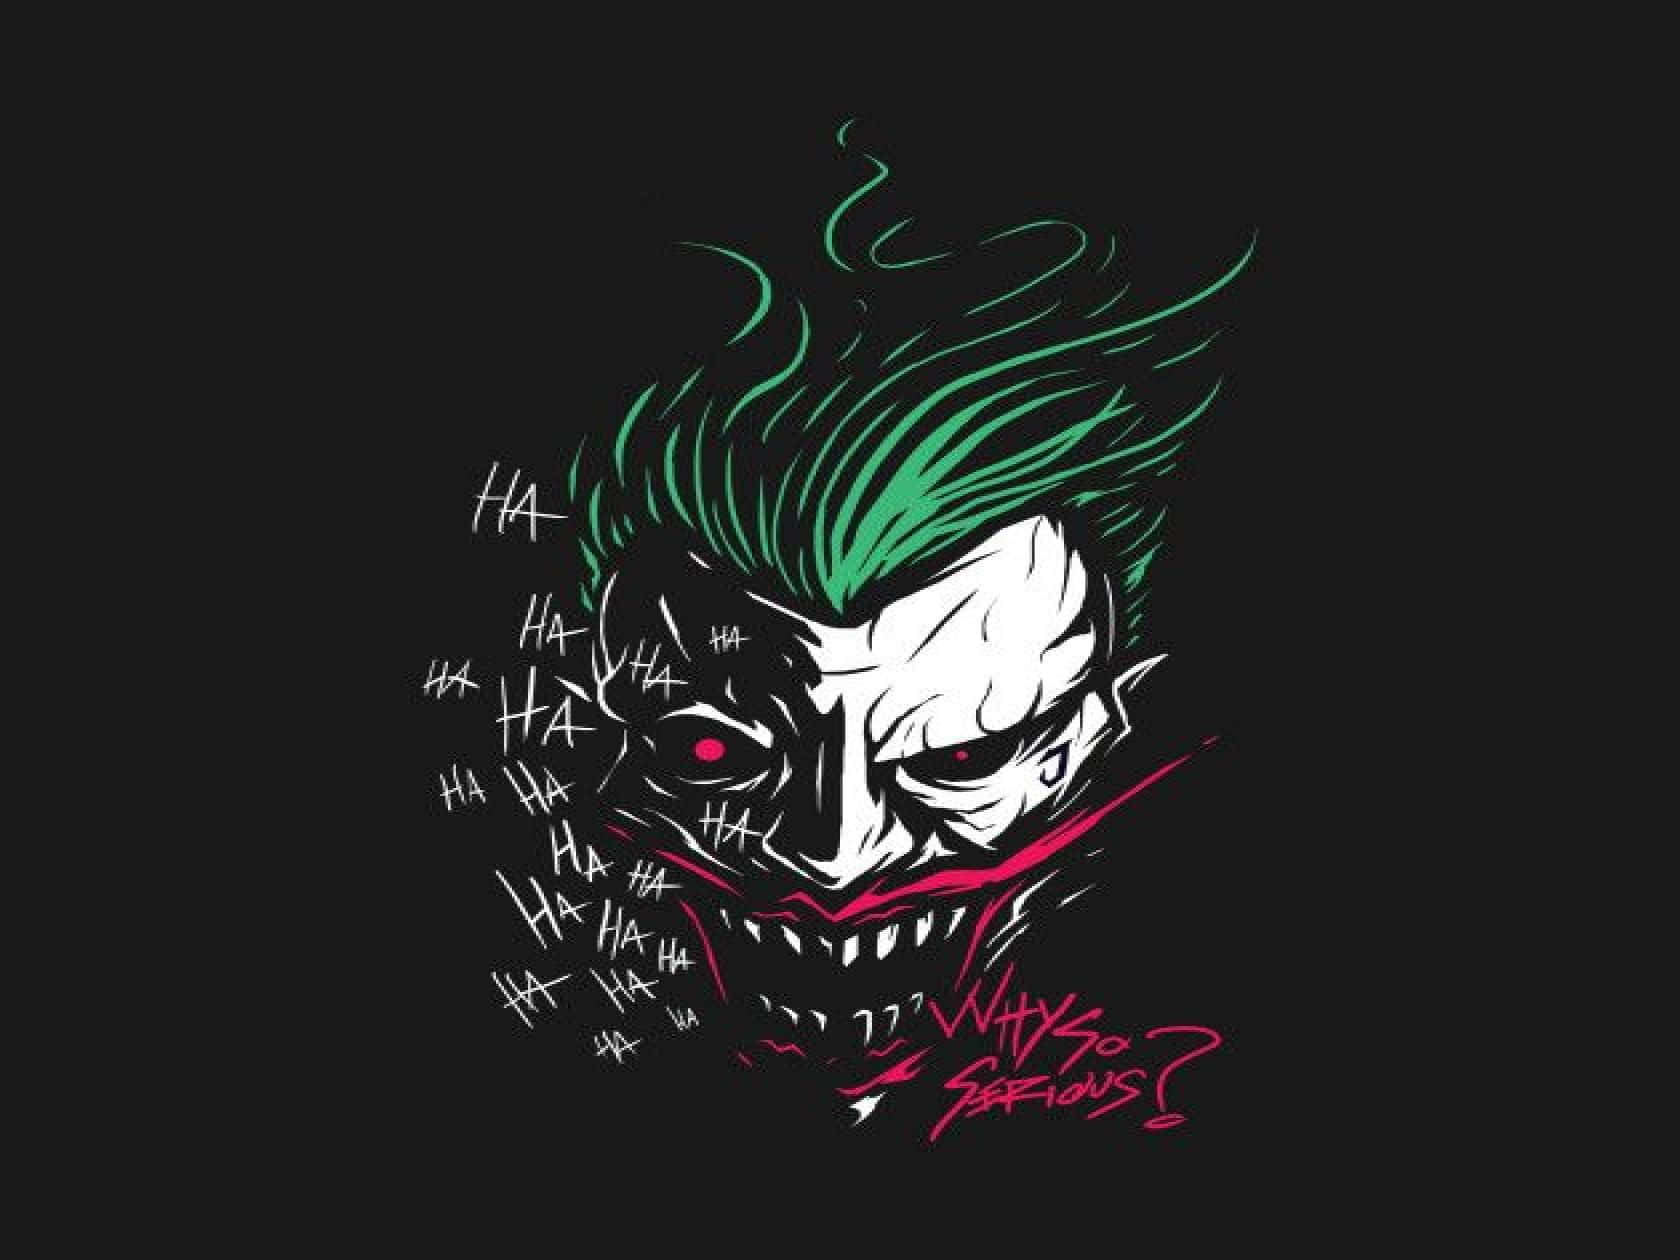 Maniacal Laughter Of The Iconic Joker Background